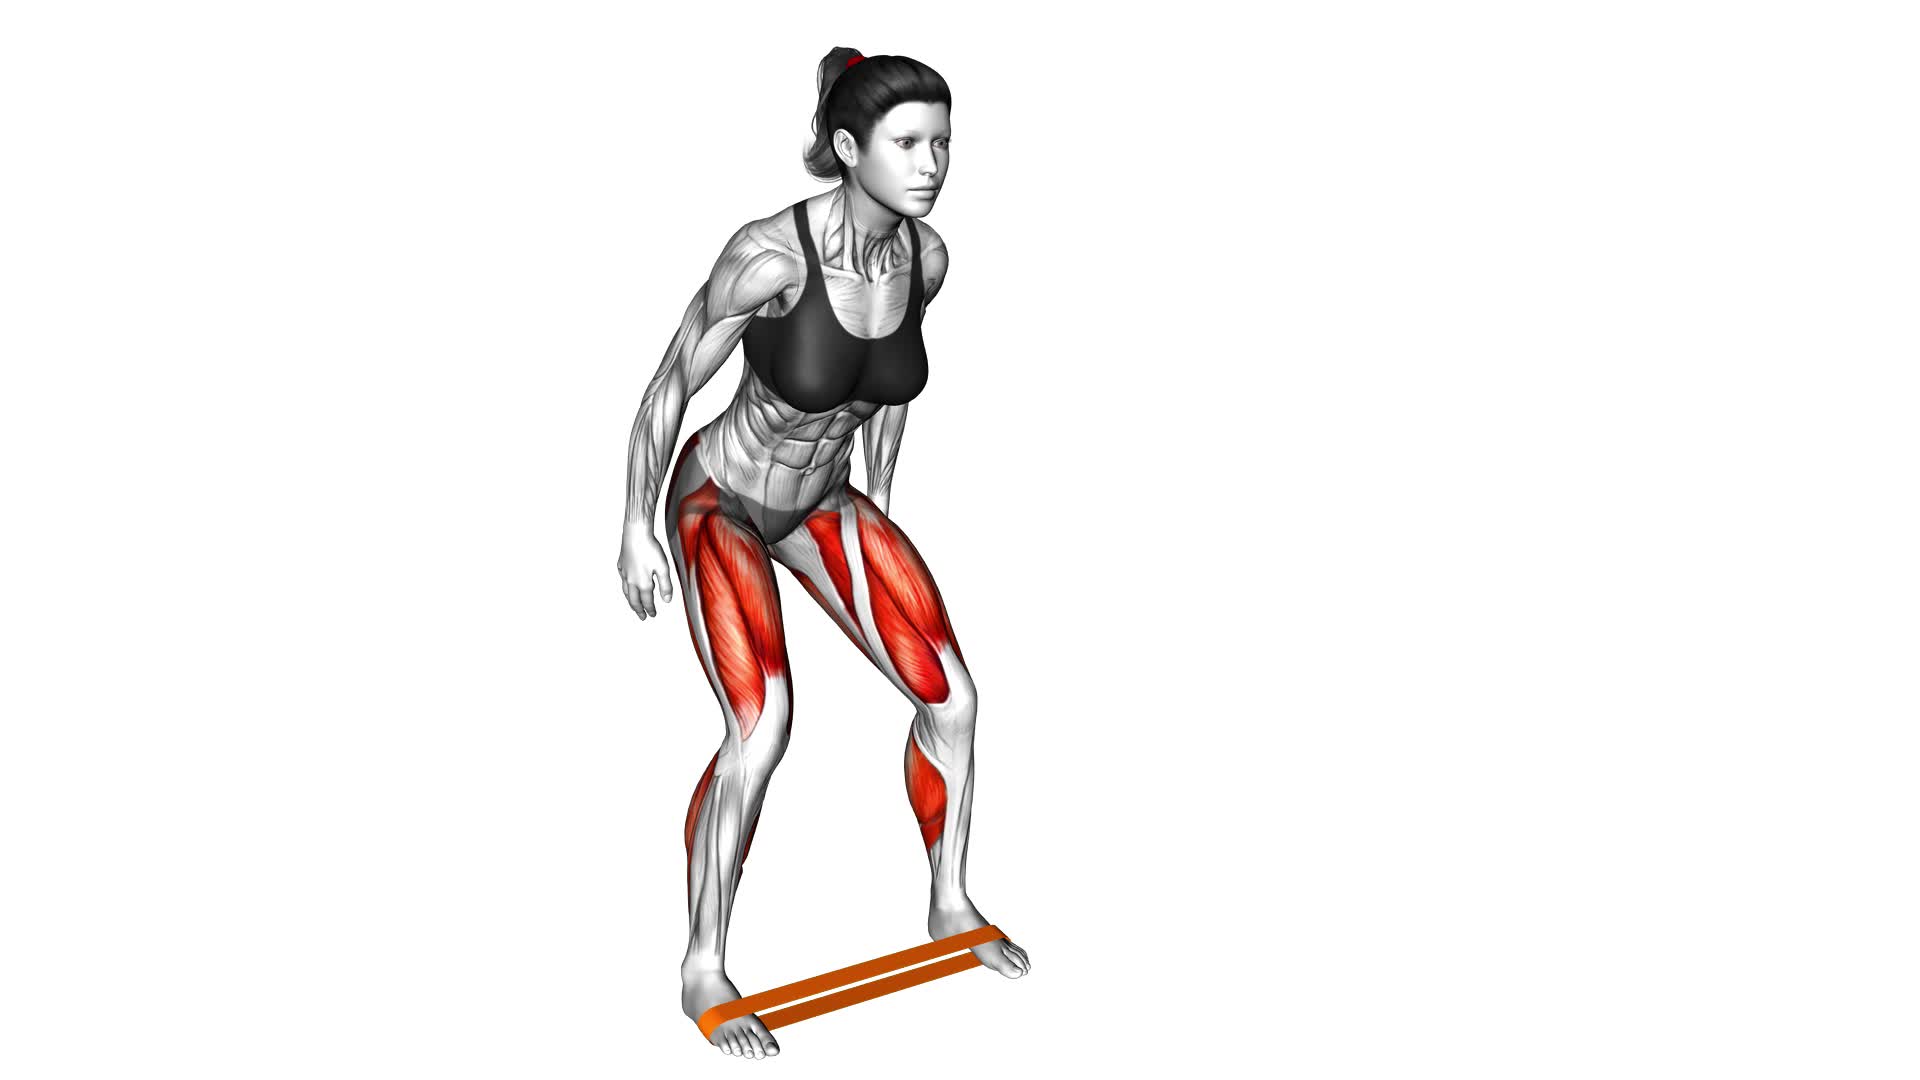 Resistance Band Lateral Walk (female) - Video Exercise Guide & Tips